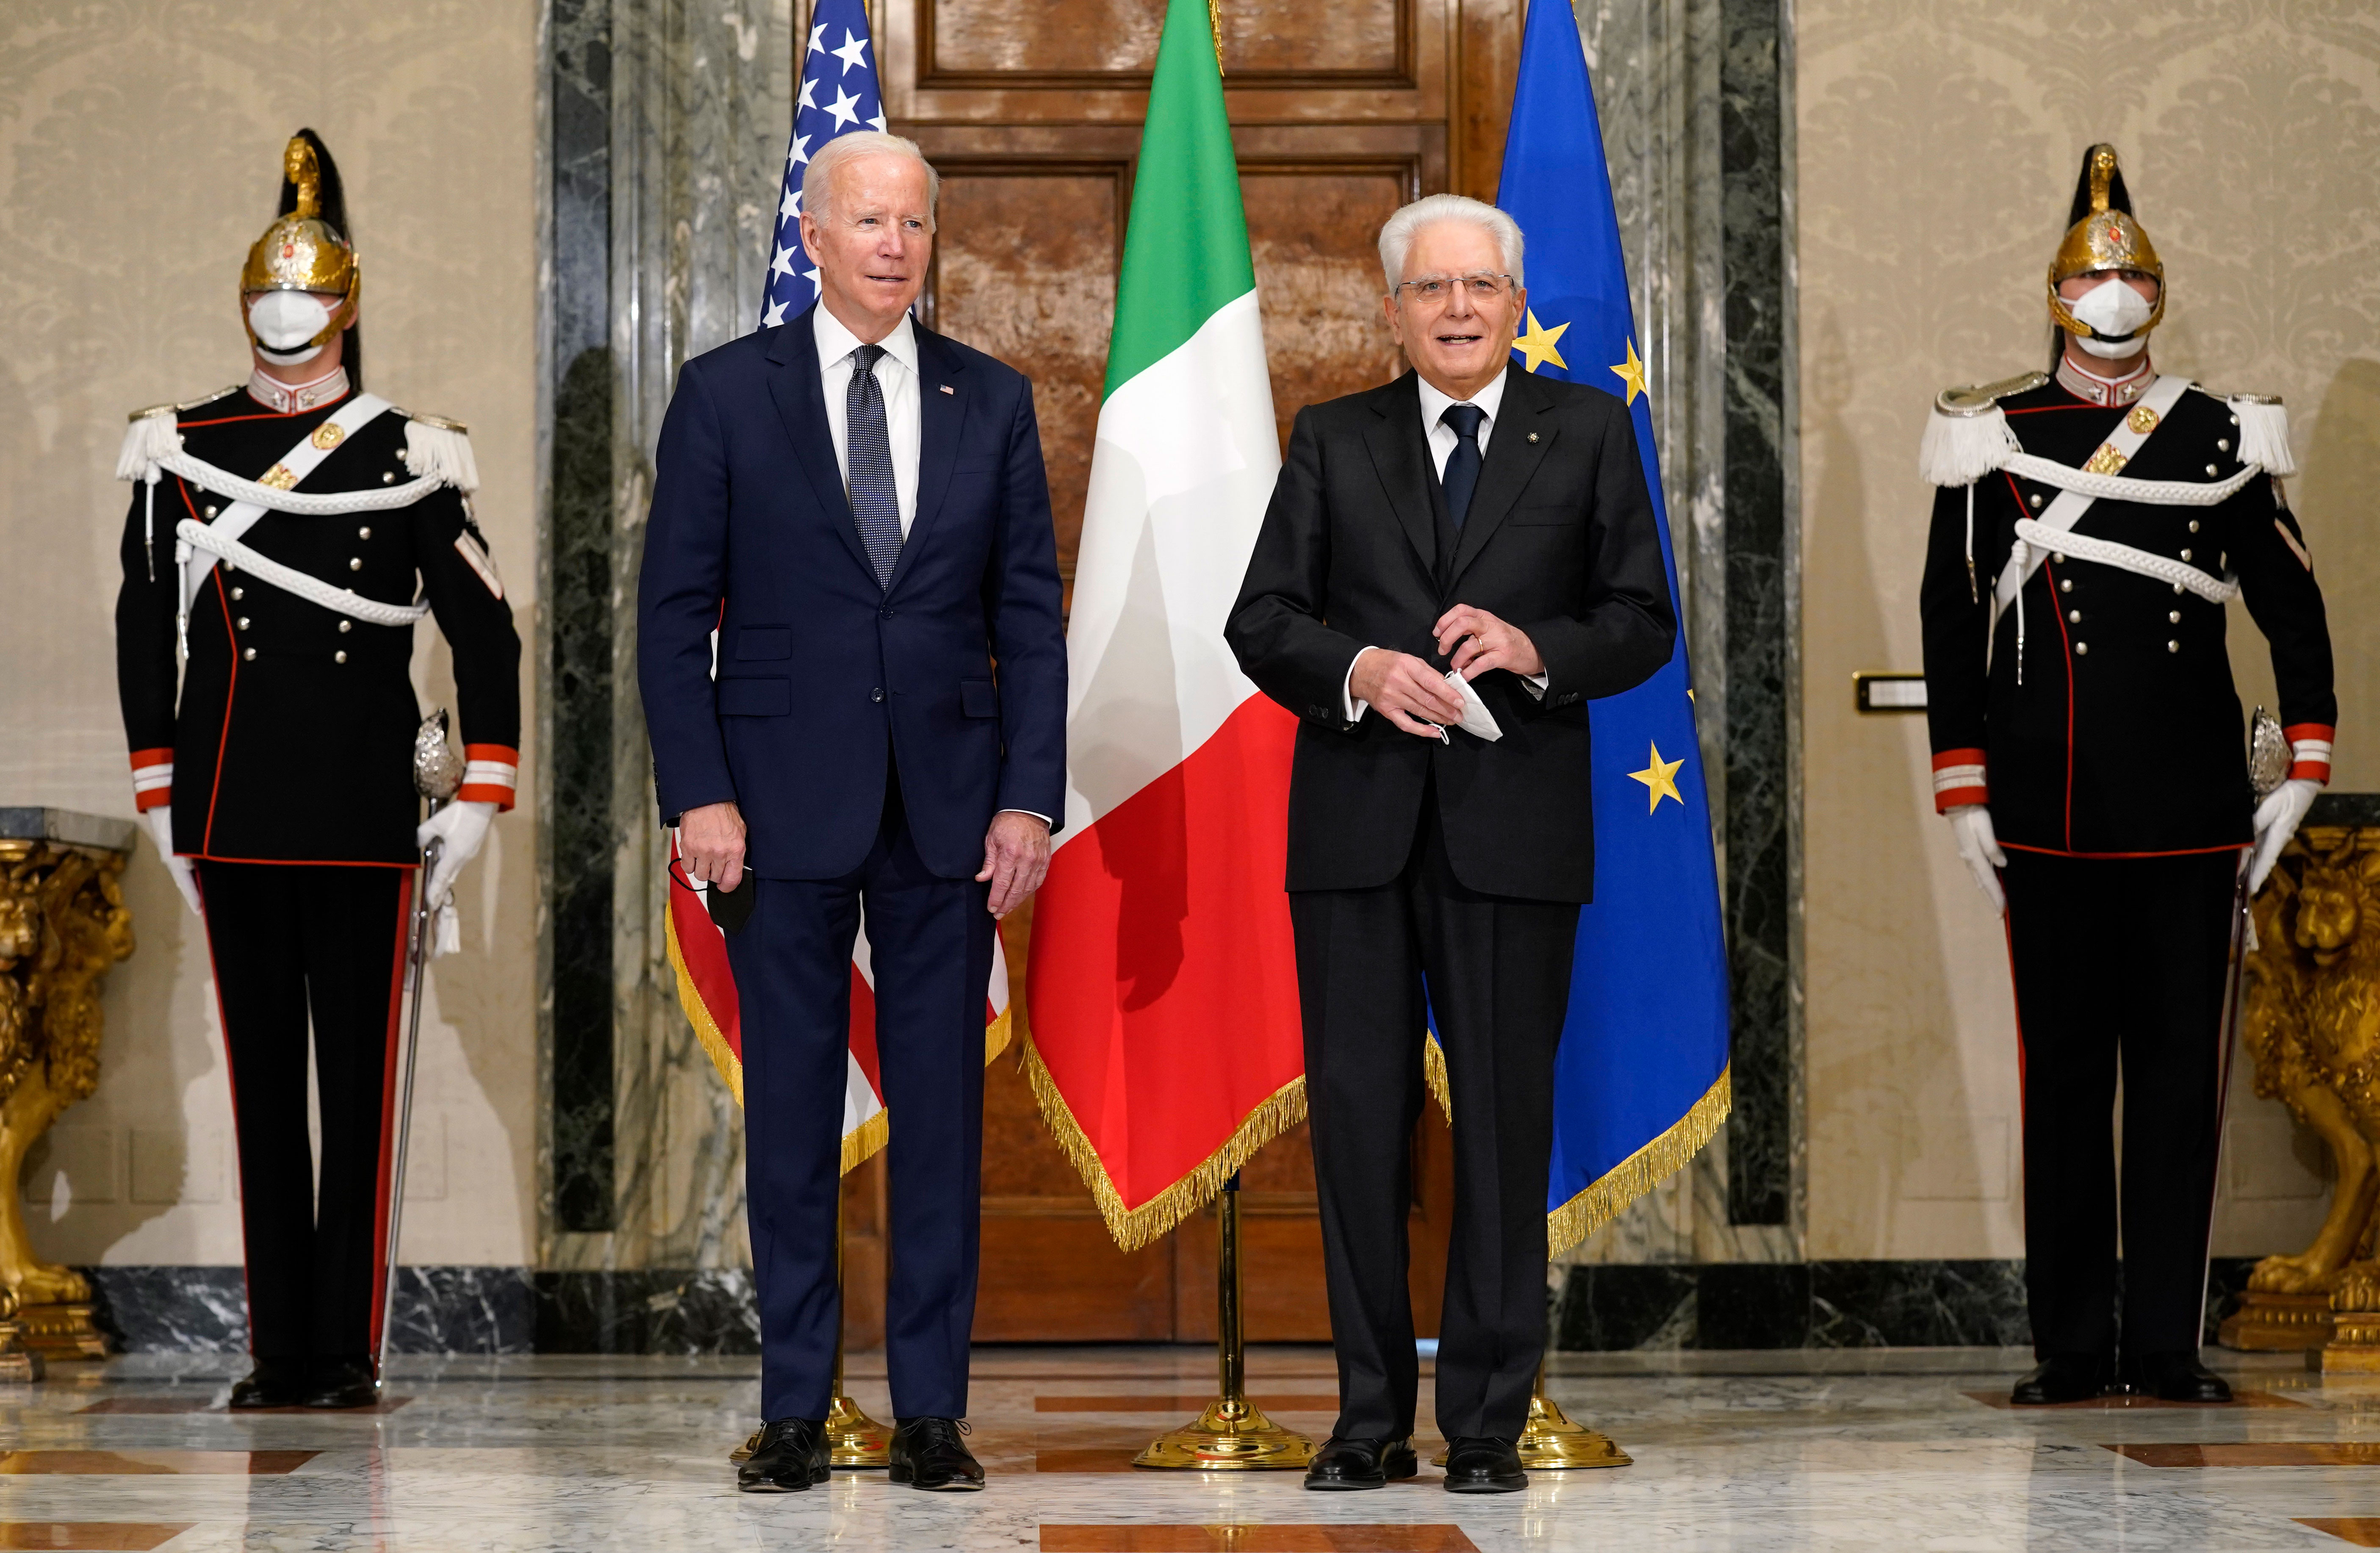 President Joe Biden takes a photo with Italy's President Sergio Mattarella prior to a meeting at the Quirinale Palace in Rome on October 29.